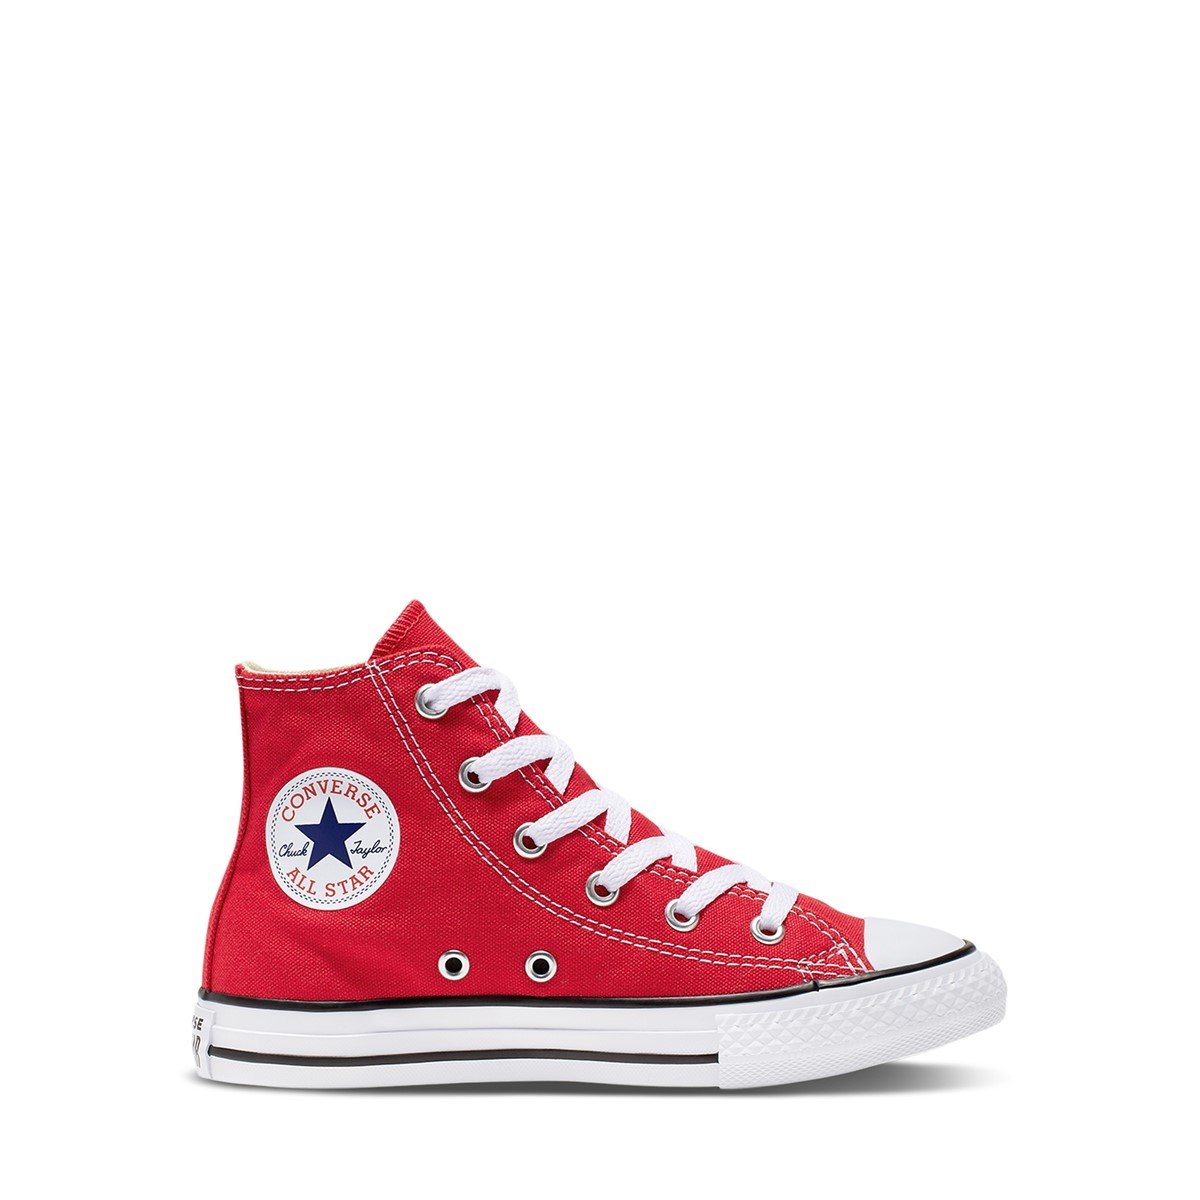 Little Kids' Chuck Taylor All Star Hi Sneakers in Red/White